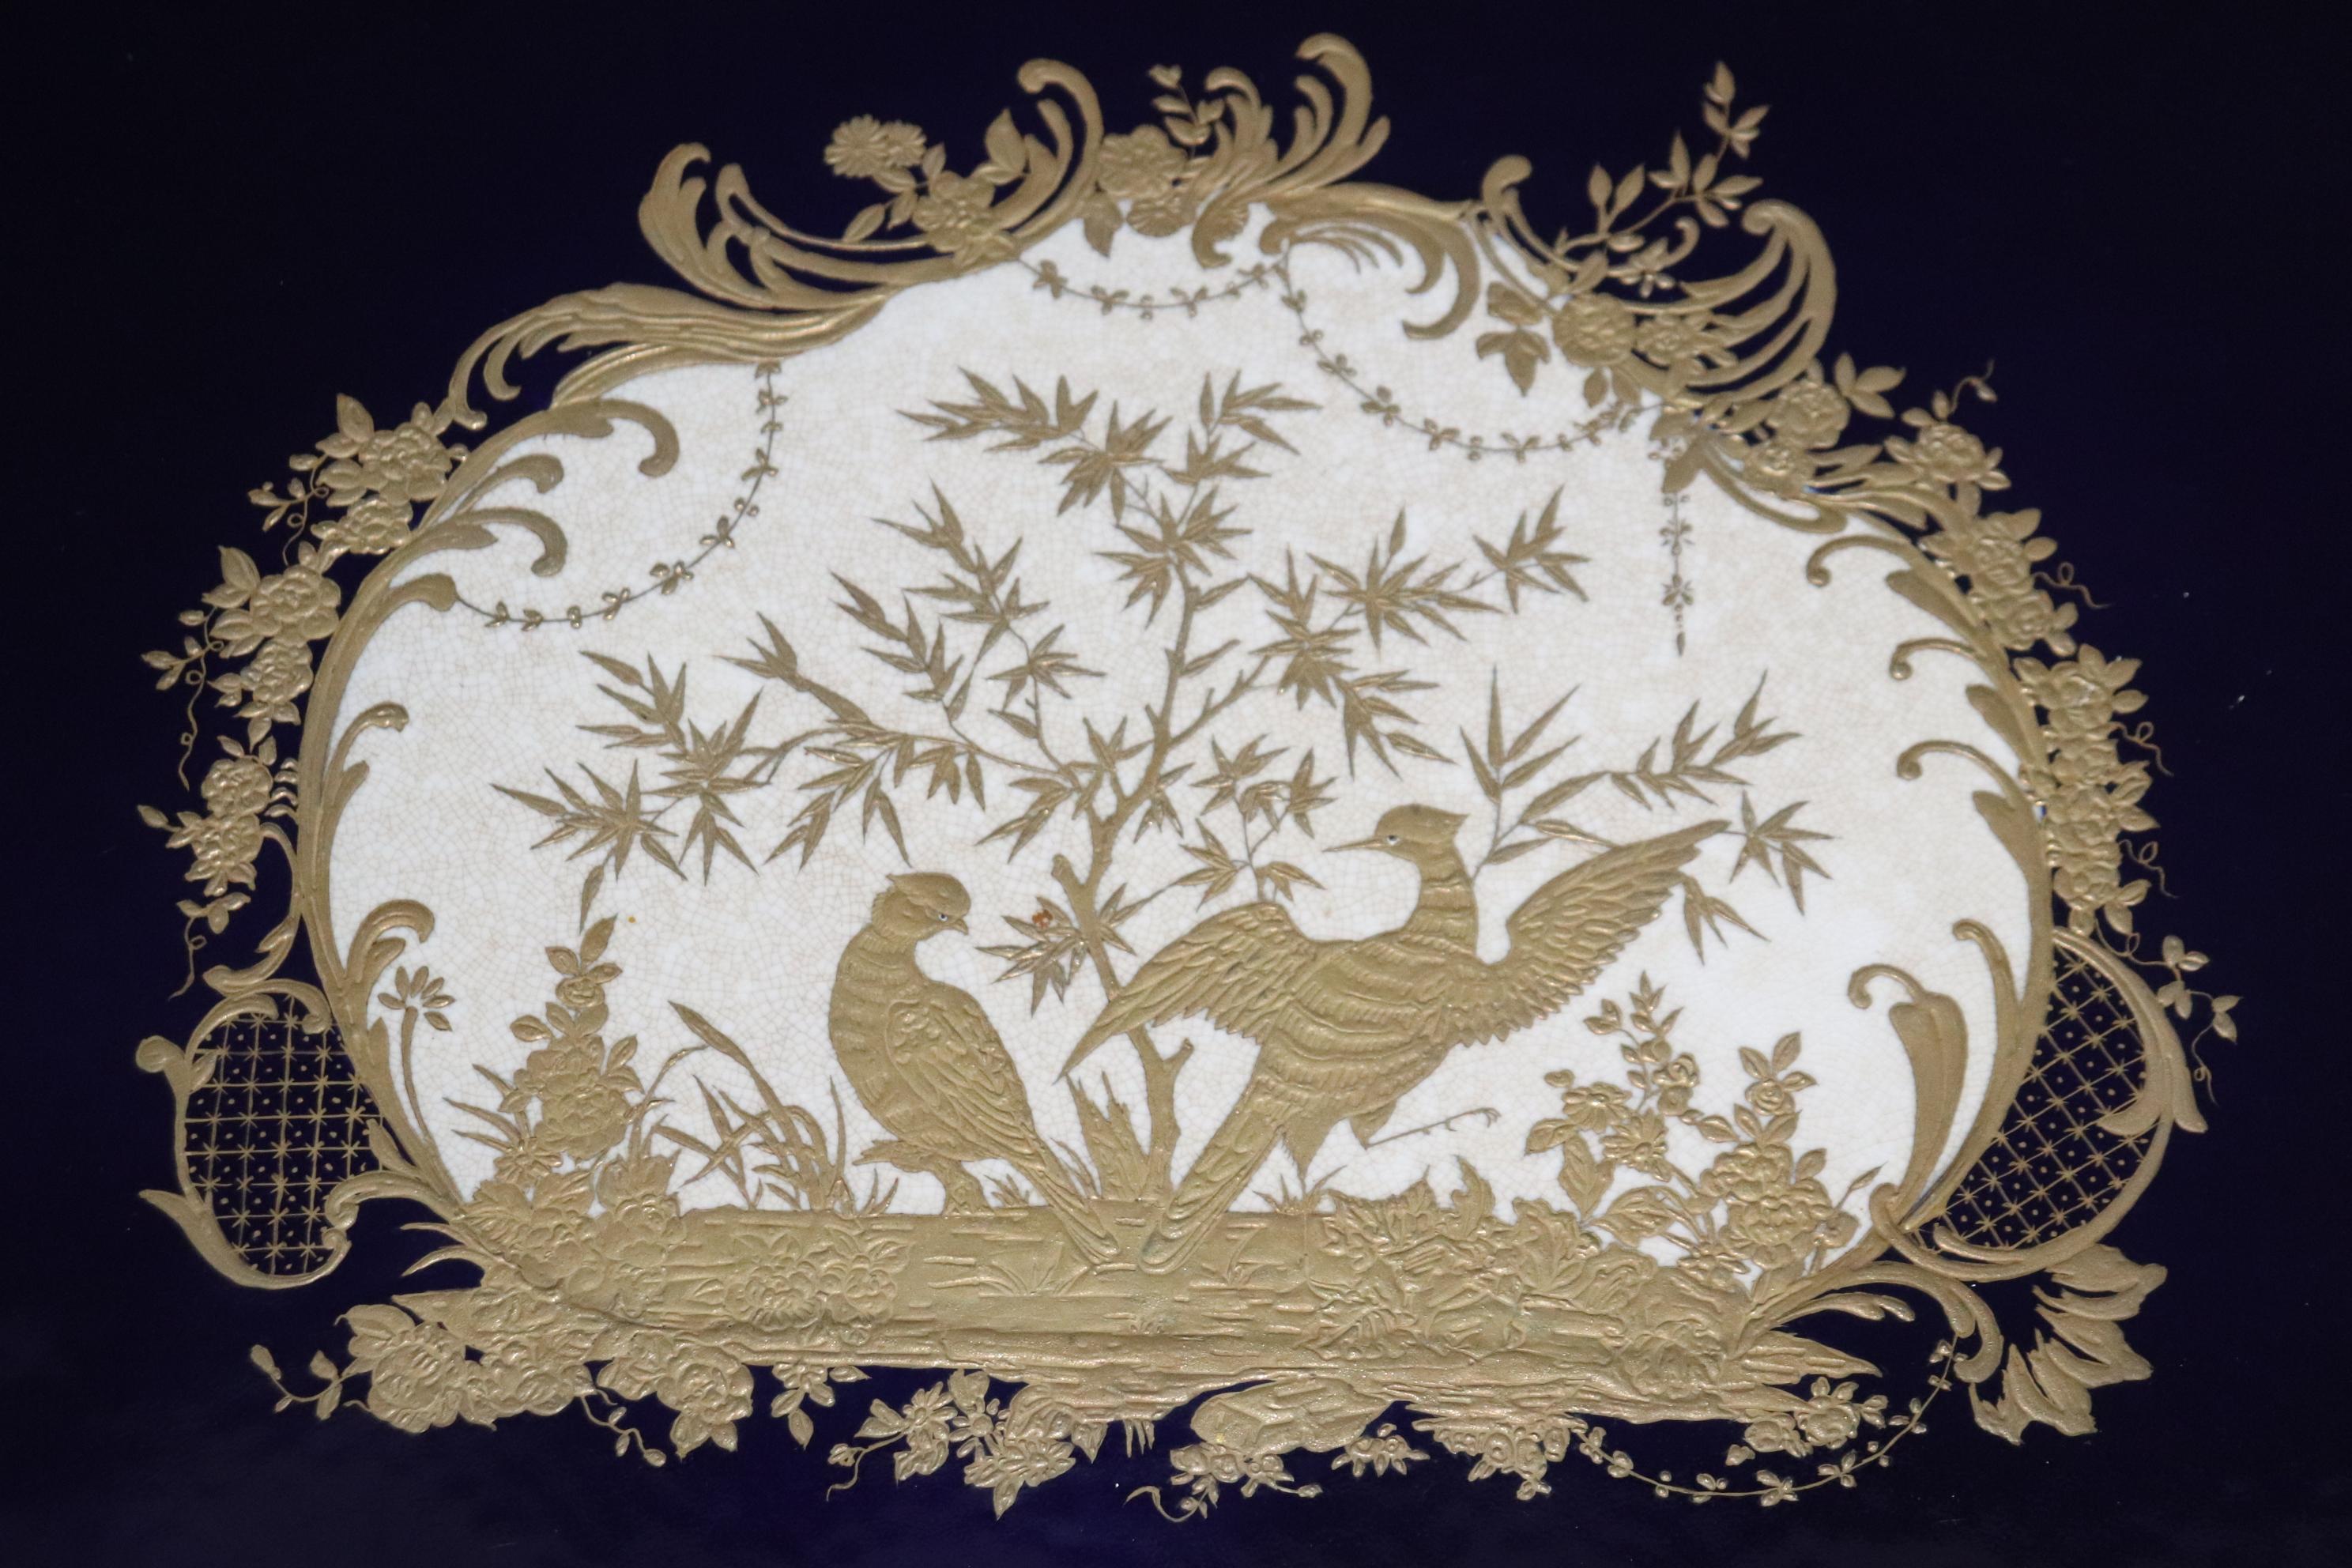 This is a MONUMENTAL table serving plateau made of the finest possible gold gilded dore' bronze with an incredible cobalt blue and crackled white background porcelain ground with gold gilded etched scenery of birds and foliage. The plateau also